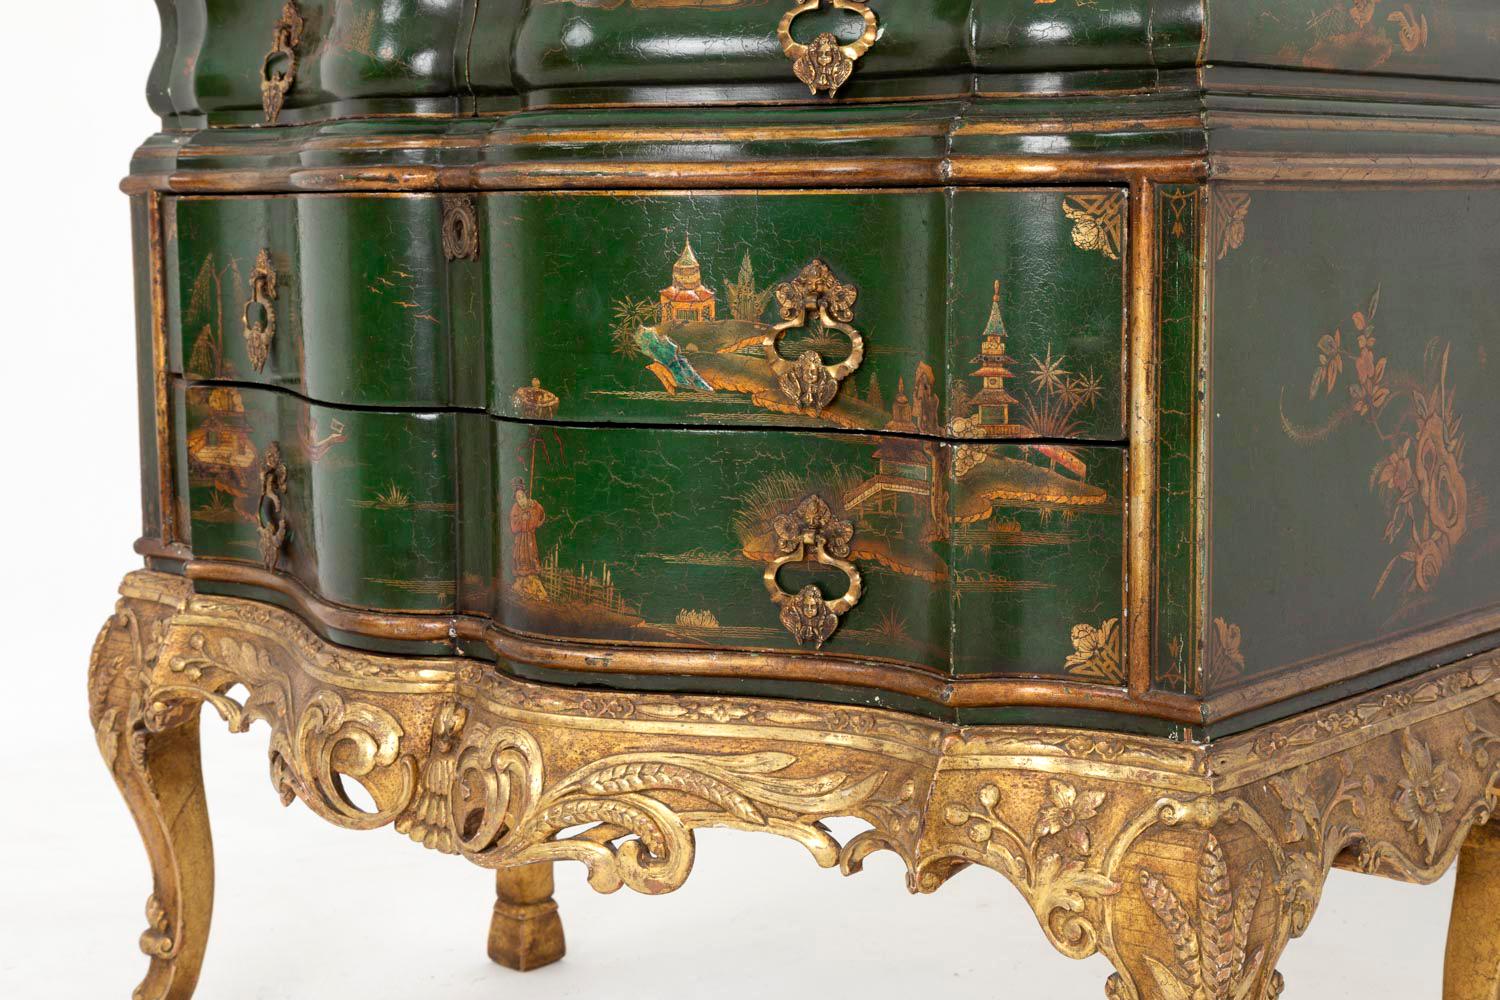 Serpentine Commode in Green Lacquered Wood, Chinese Decoration, 1950s (Vergoldet)